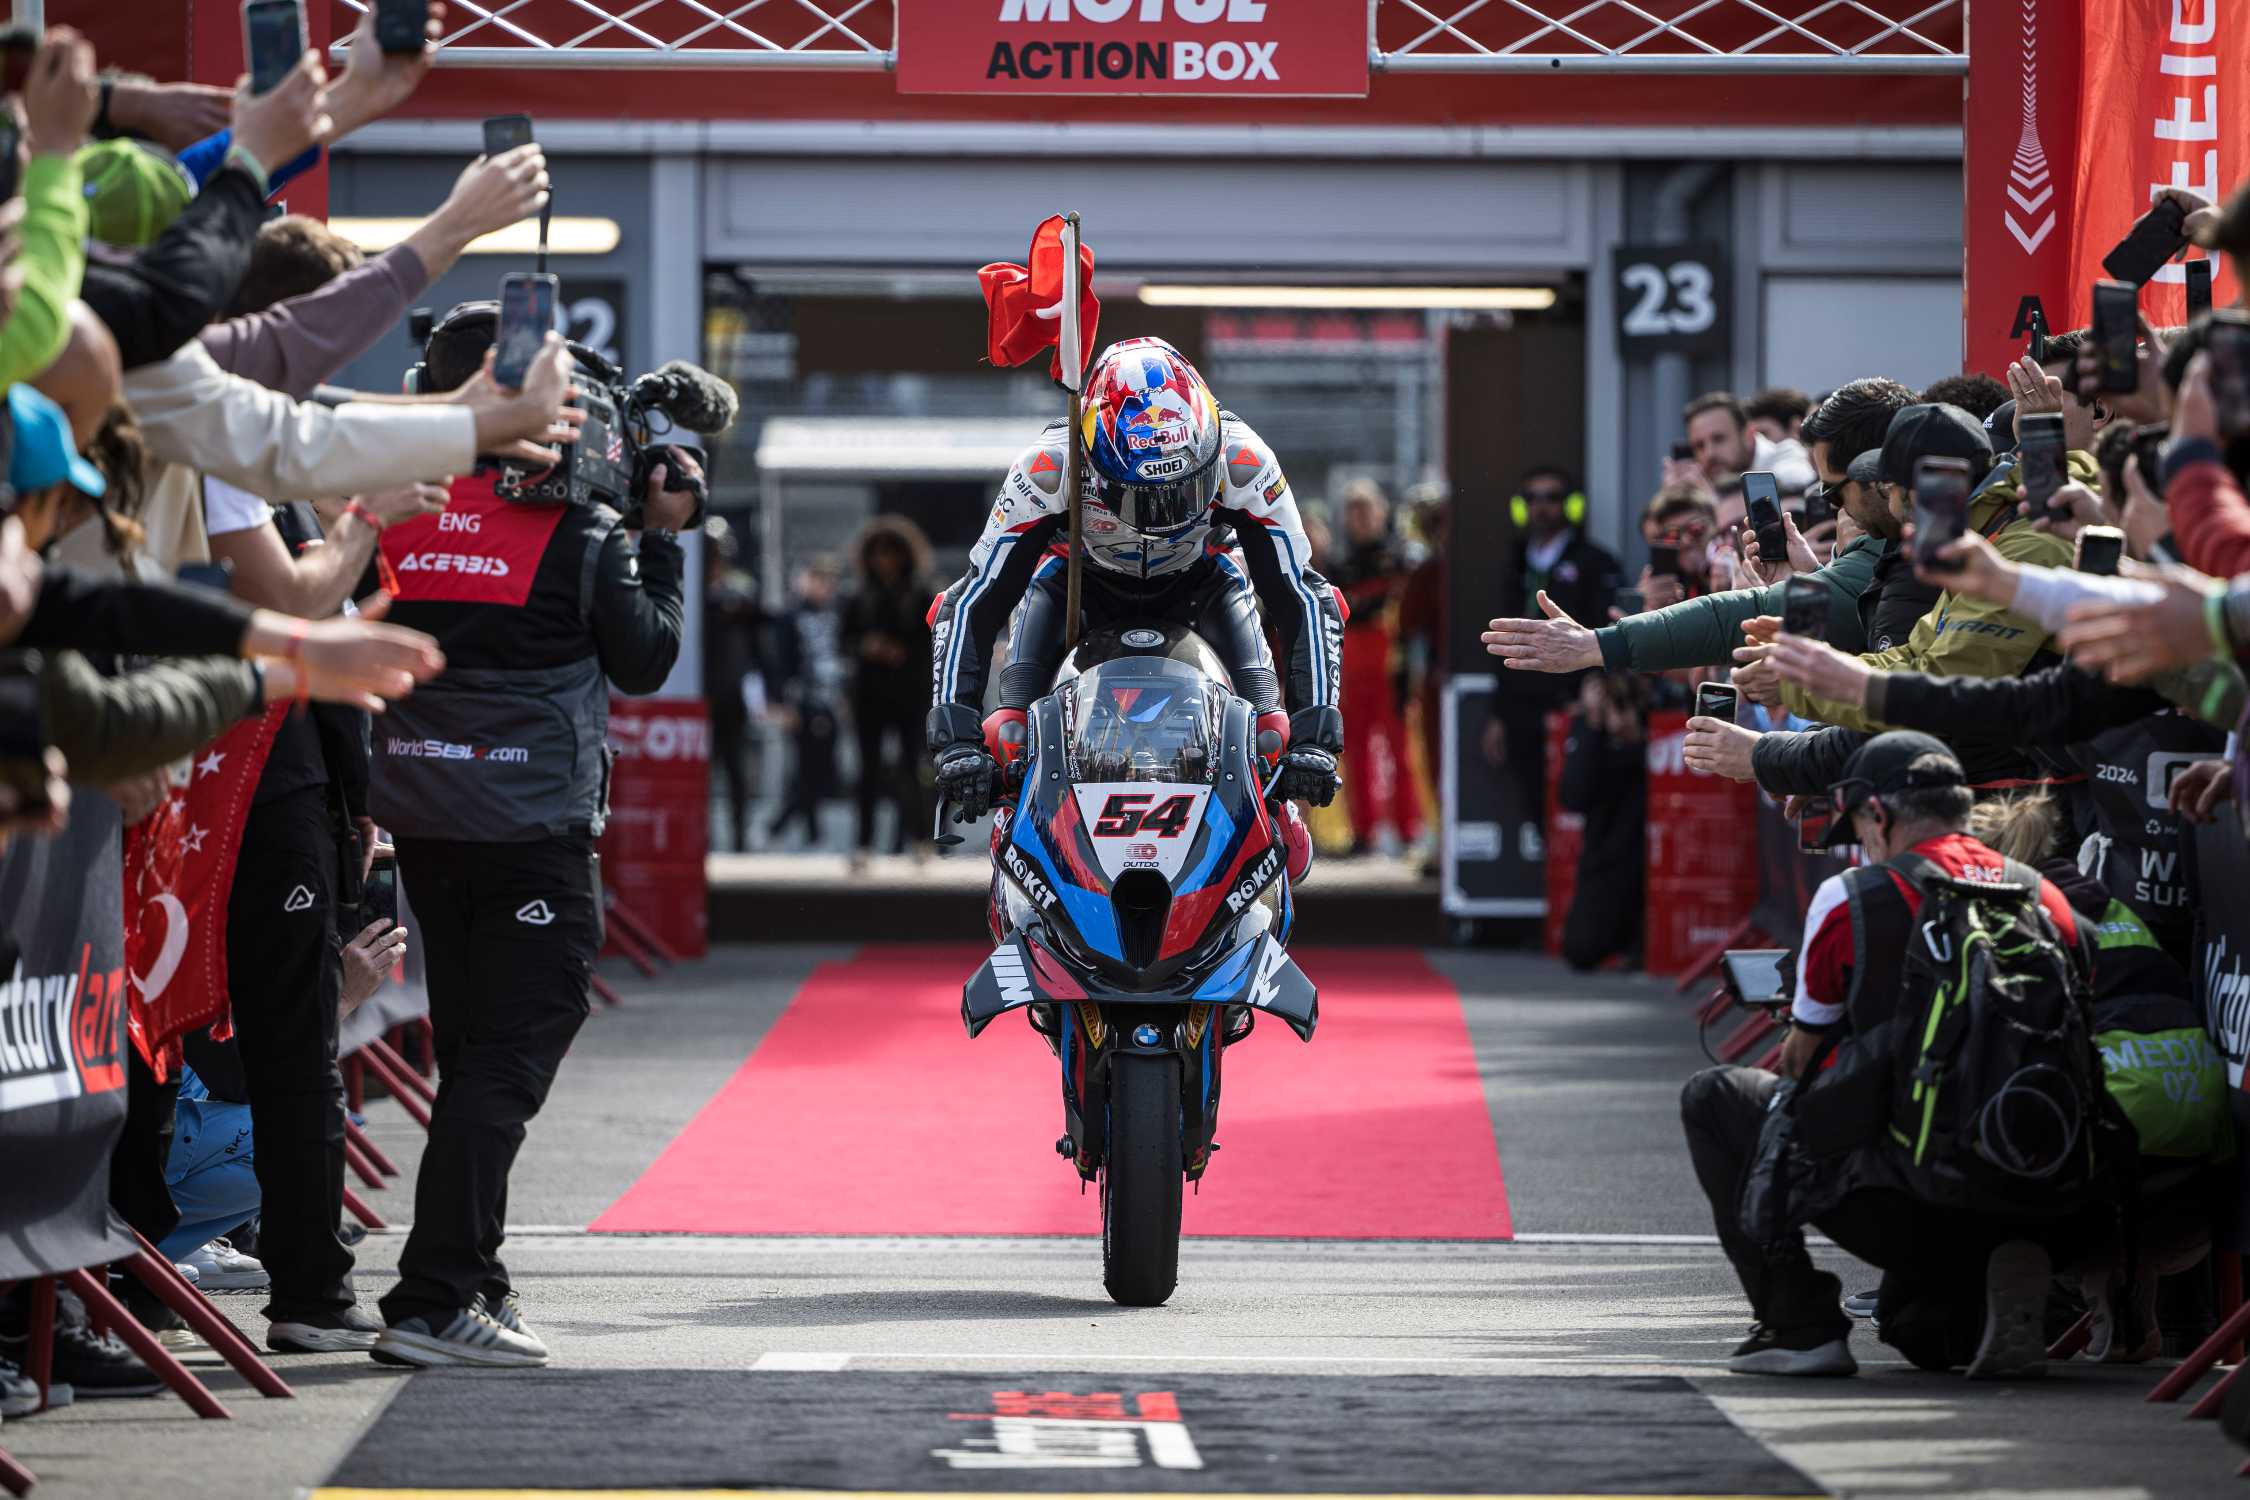 Conclusion of an incredible weekend: Another victory and podium for Toprak Razgatlioglu and the BMW M 1000 RR on WorldSBK Sunday at Barcelona.